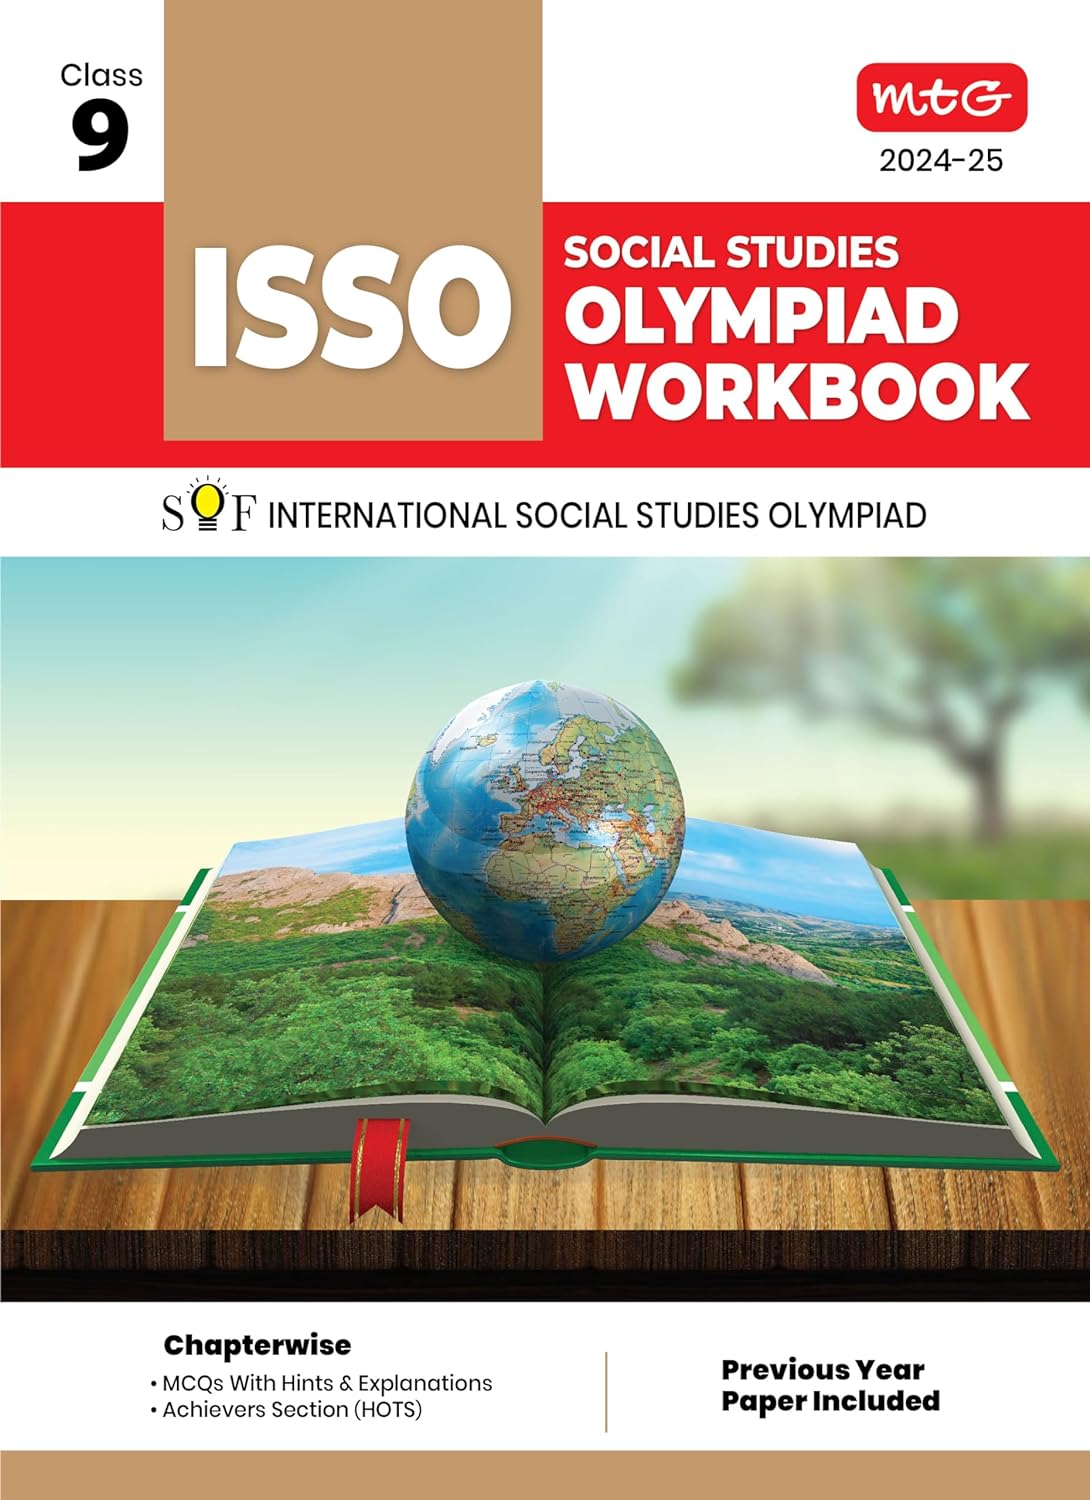 MTG Olympiad ISSO Social Studies Workbook For Class 9 - Latest for 2024-25 Session